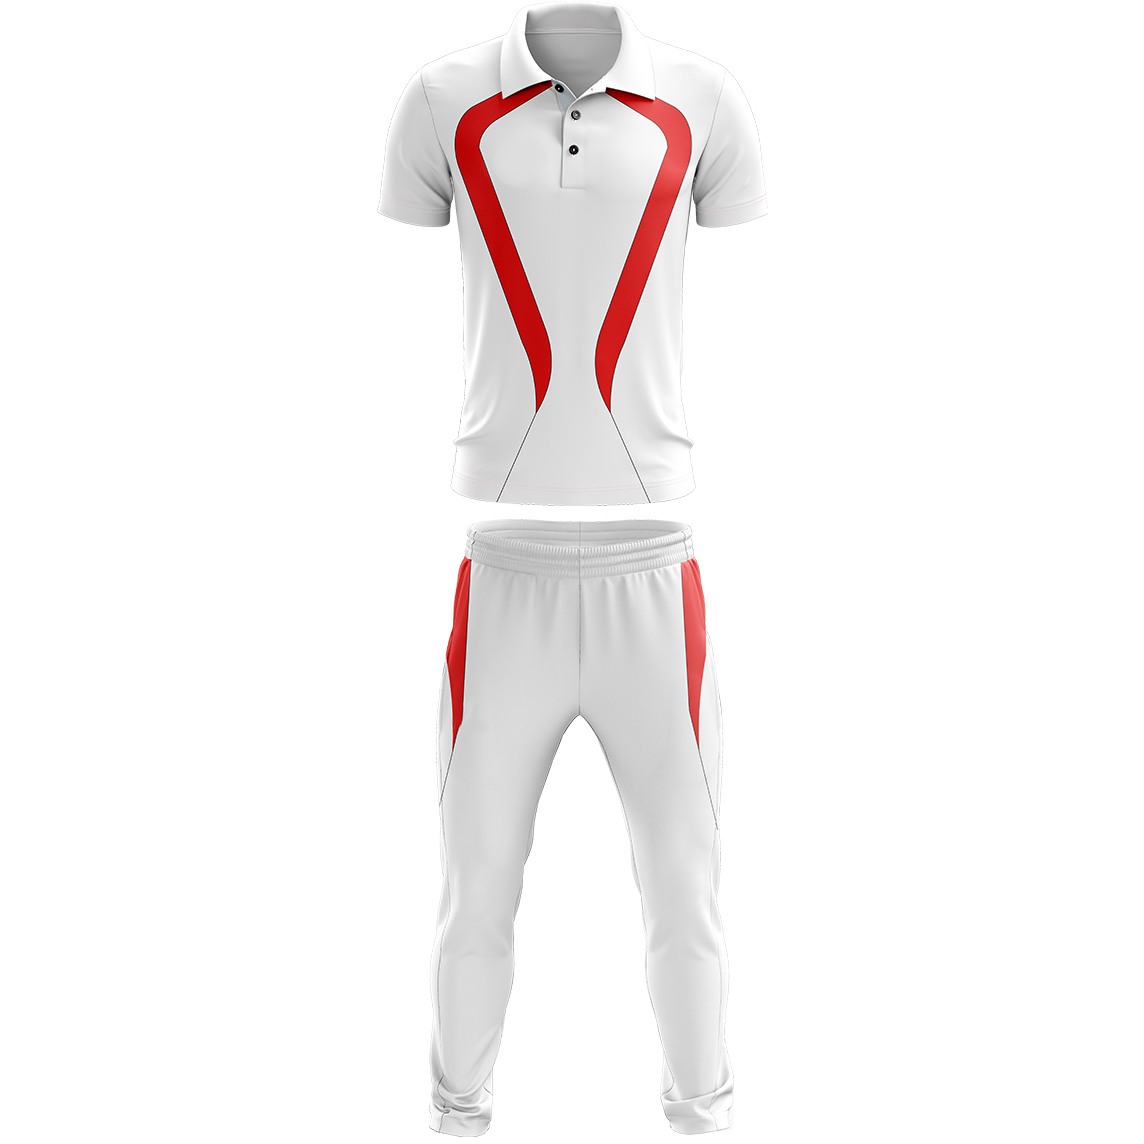 Top Quality Sublimated Cricket Uniforms